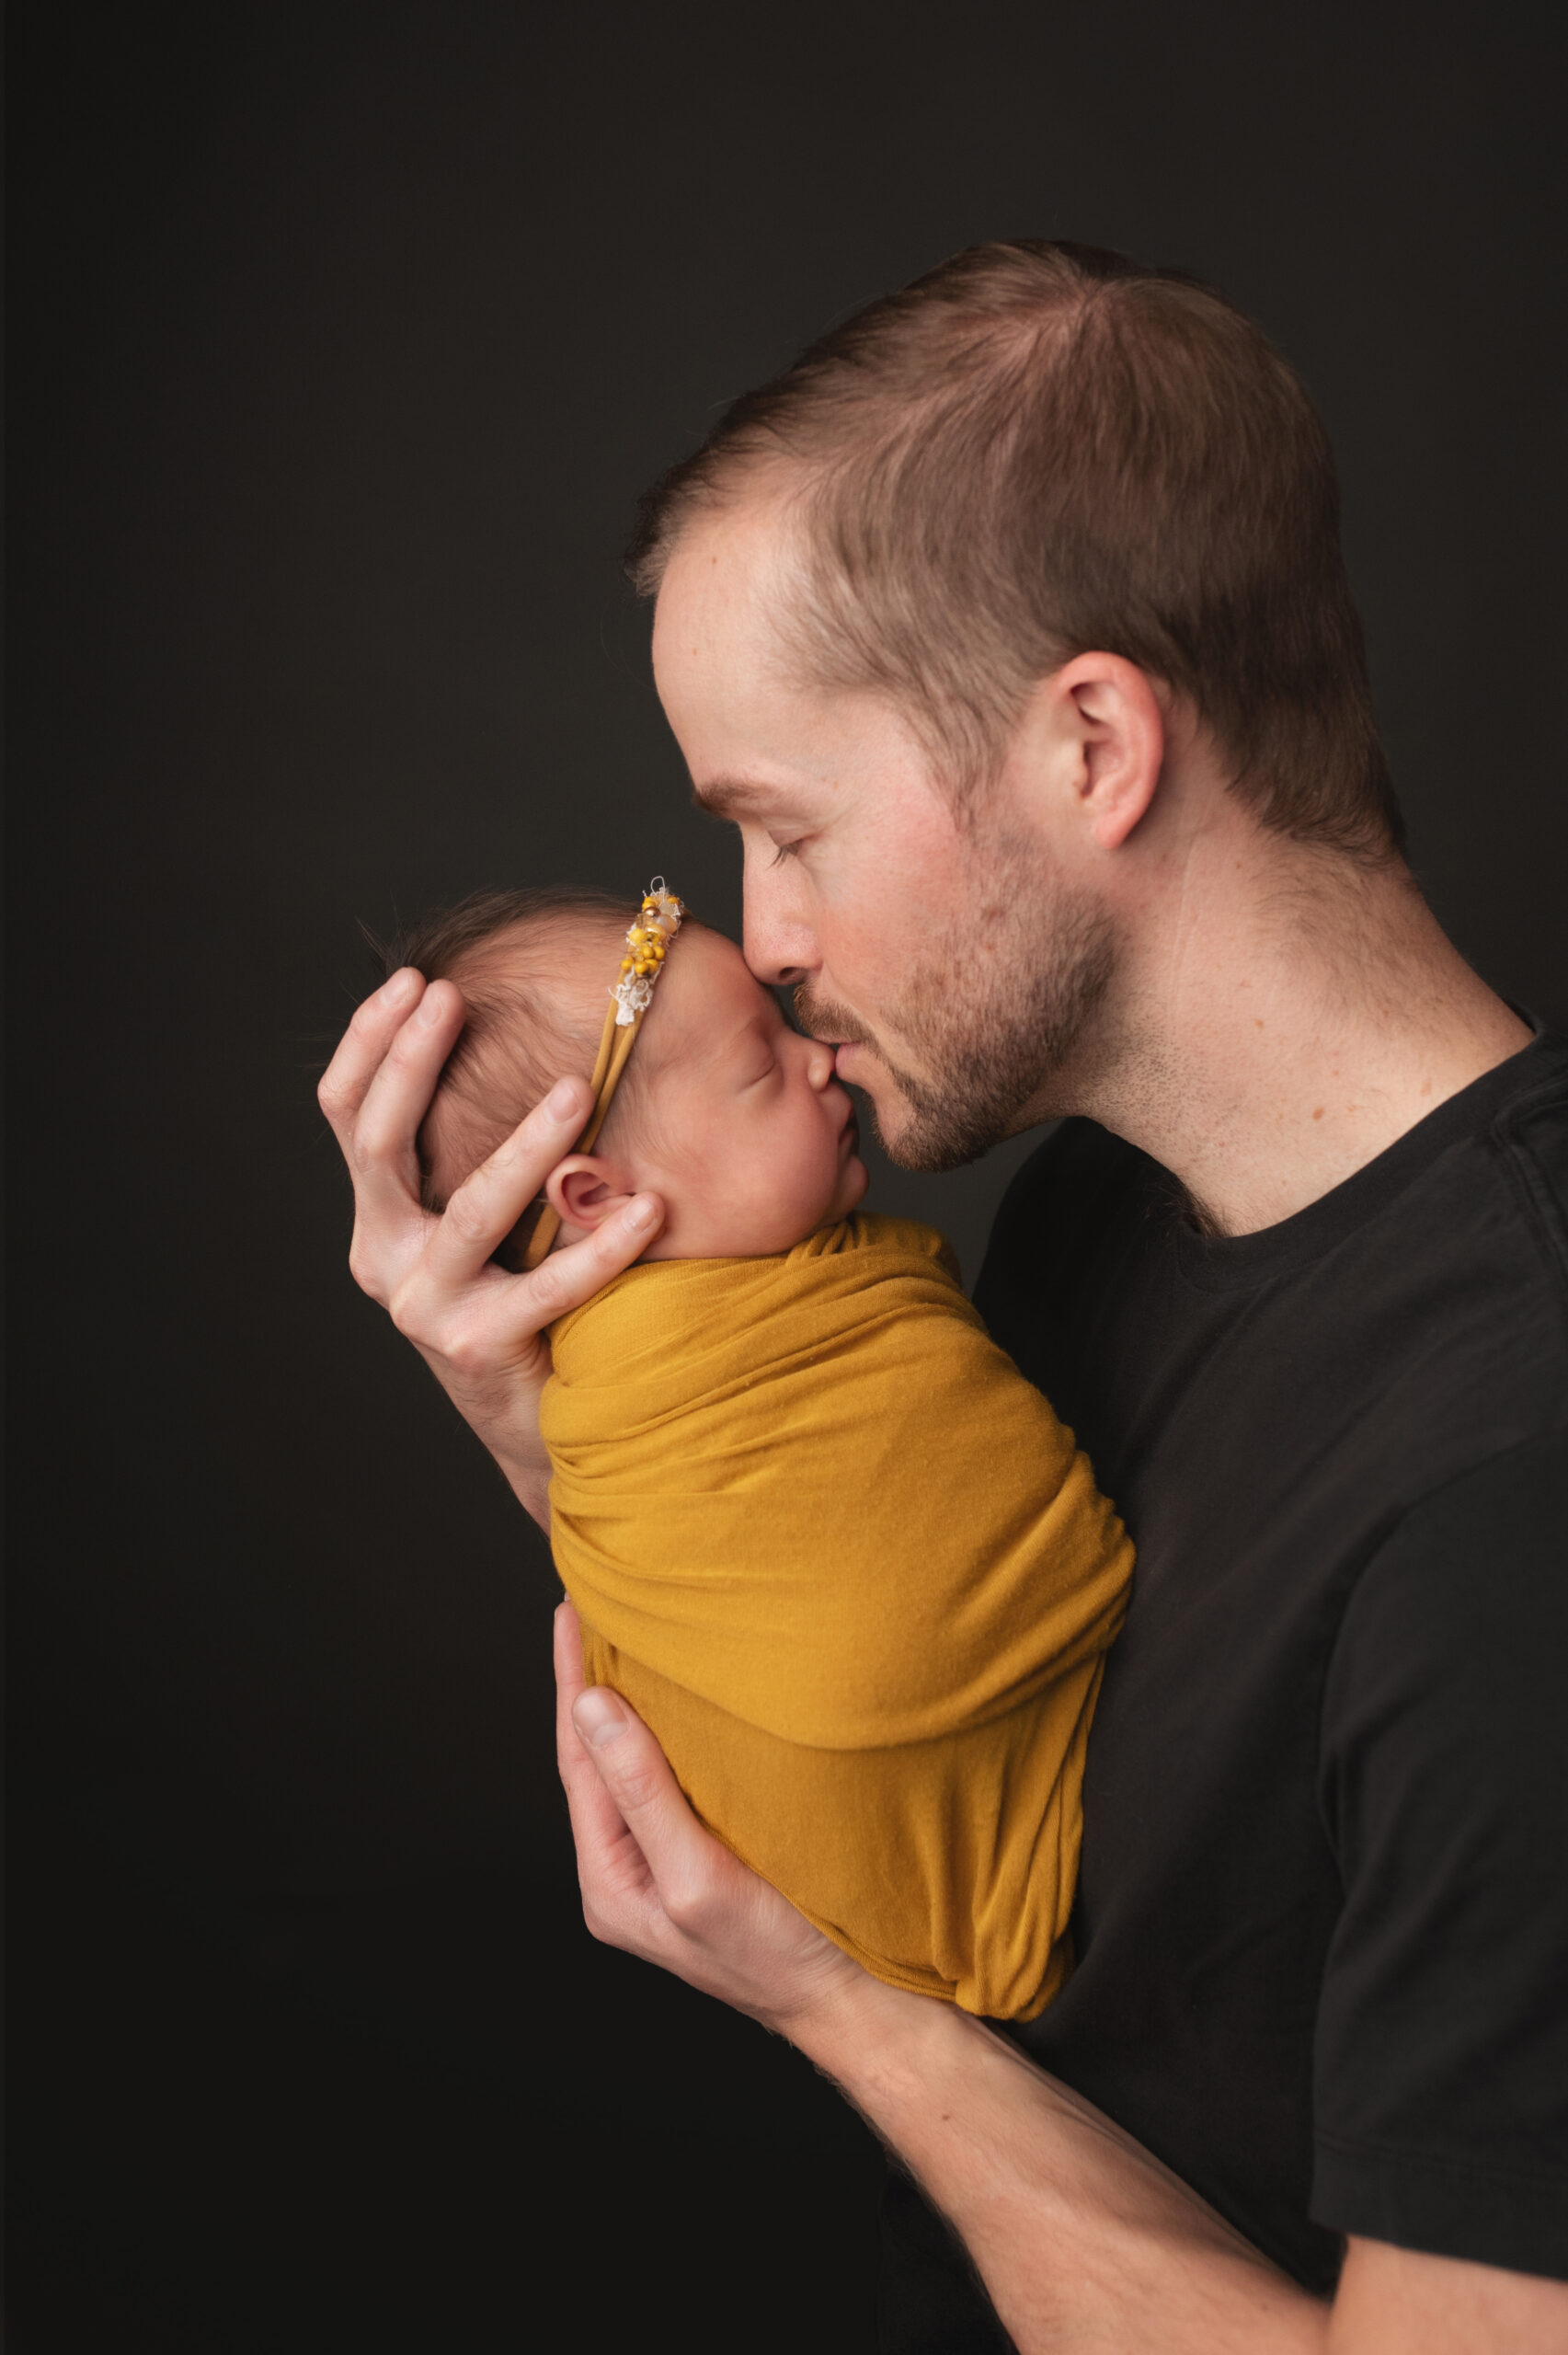 Grand rapids newborn photo session dad holding baby close and giving her a kiss